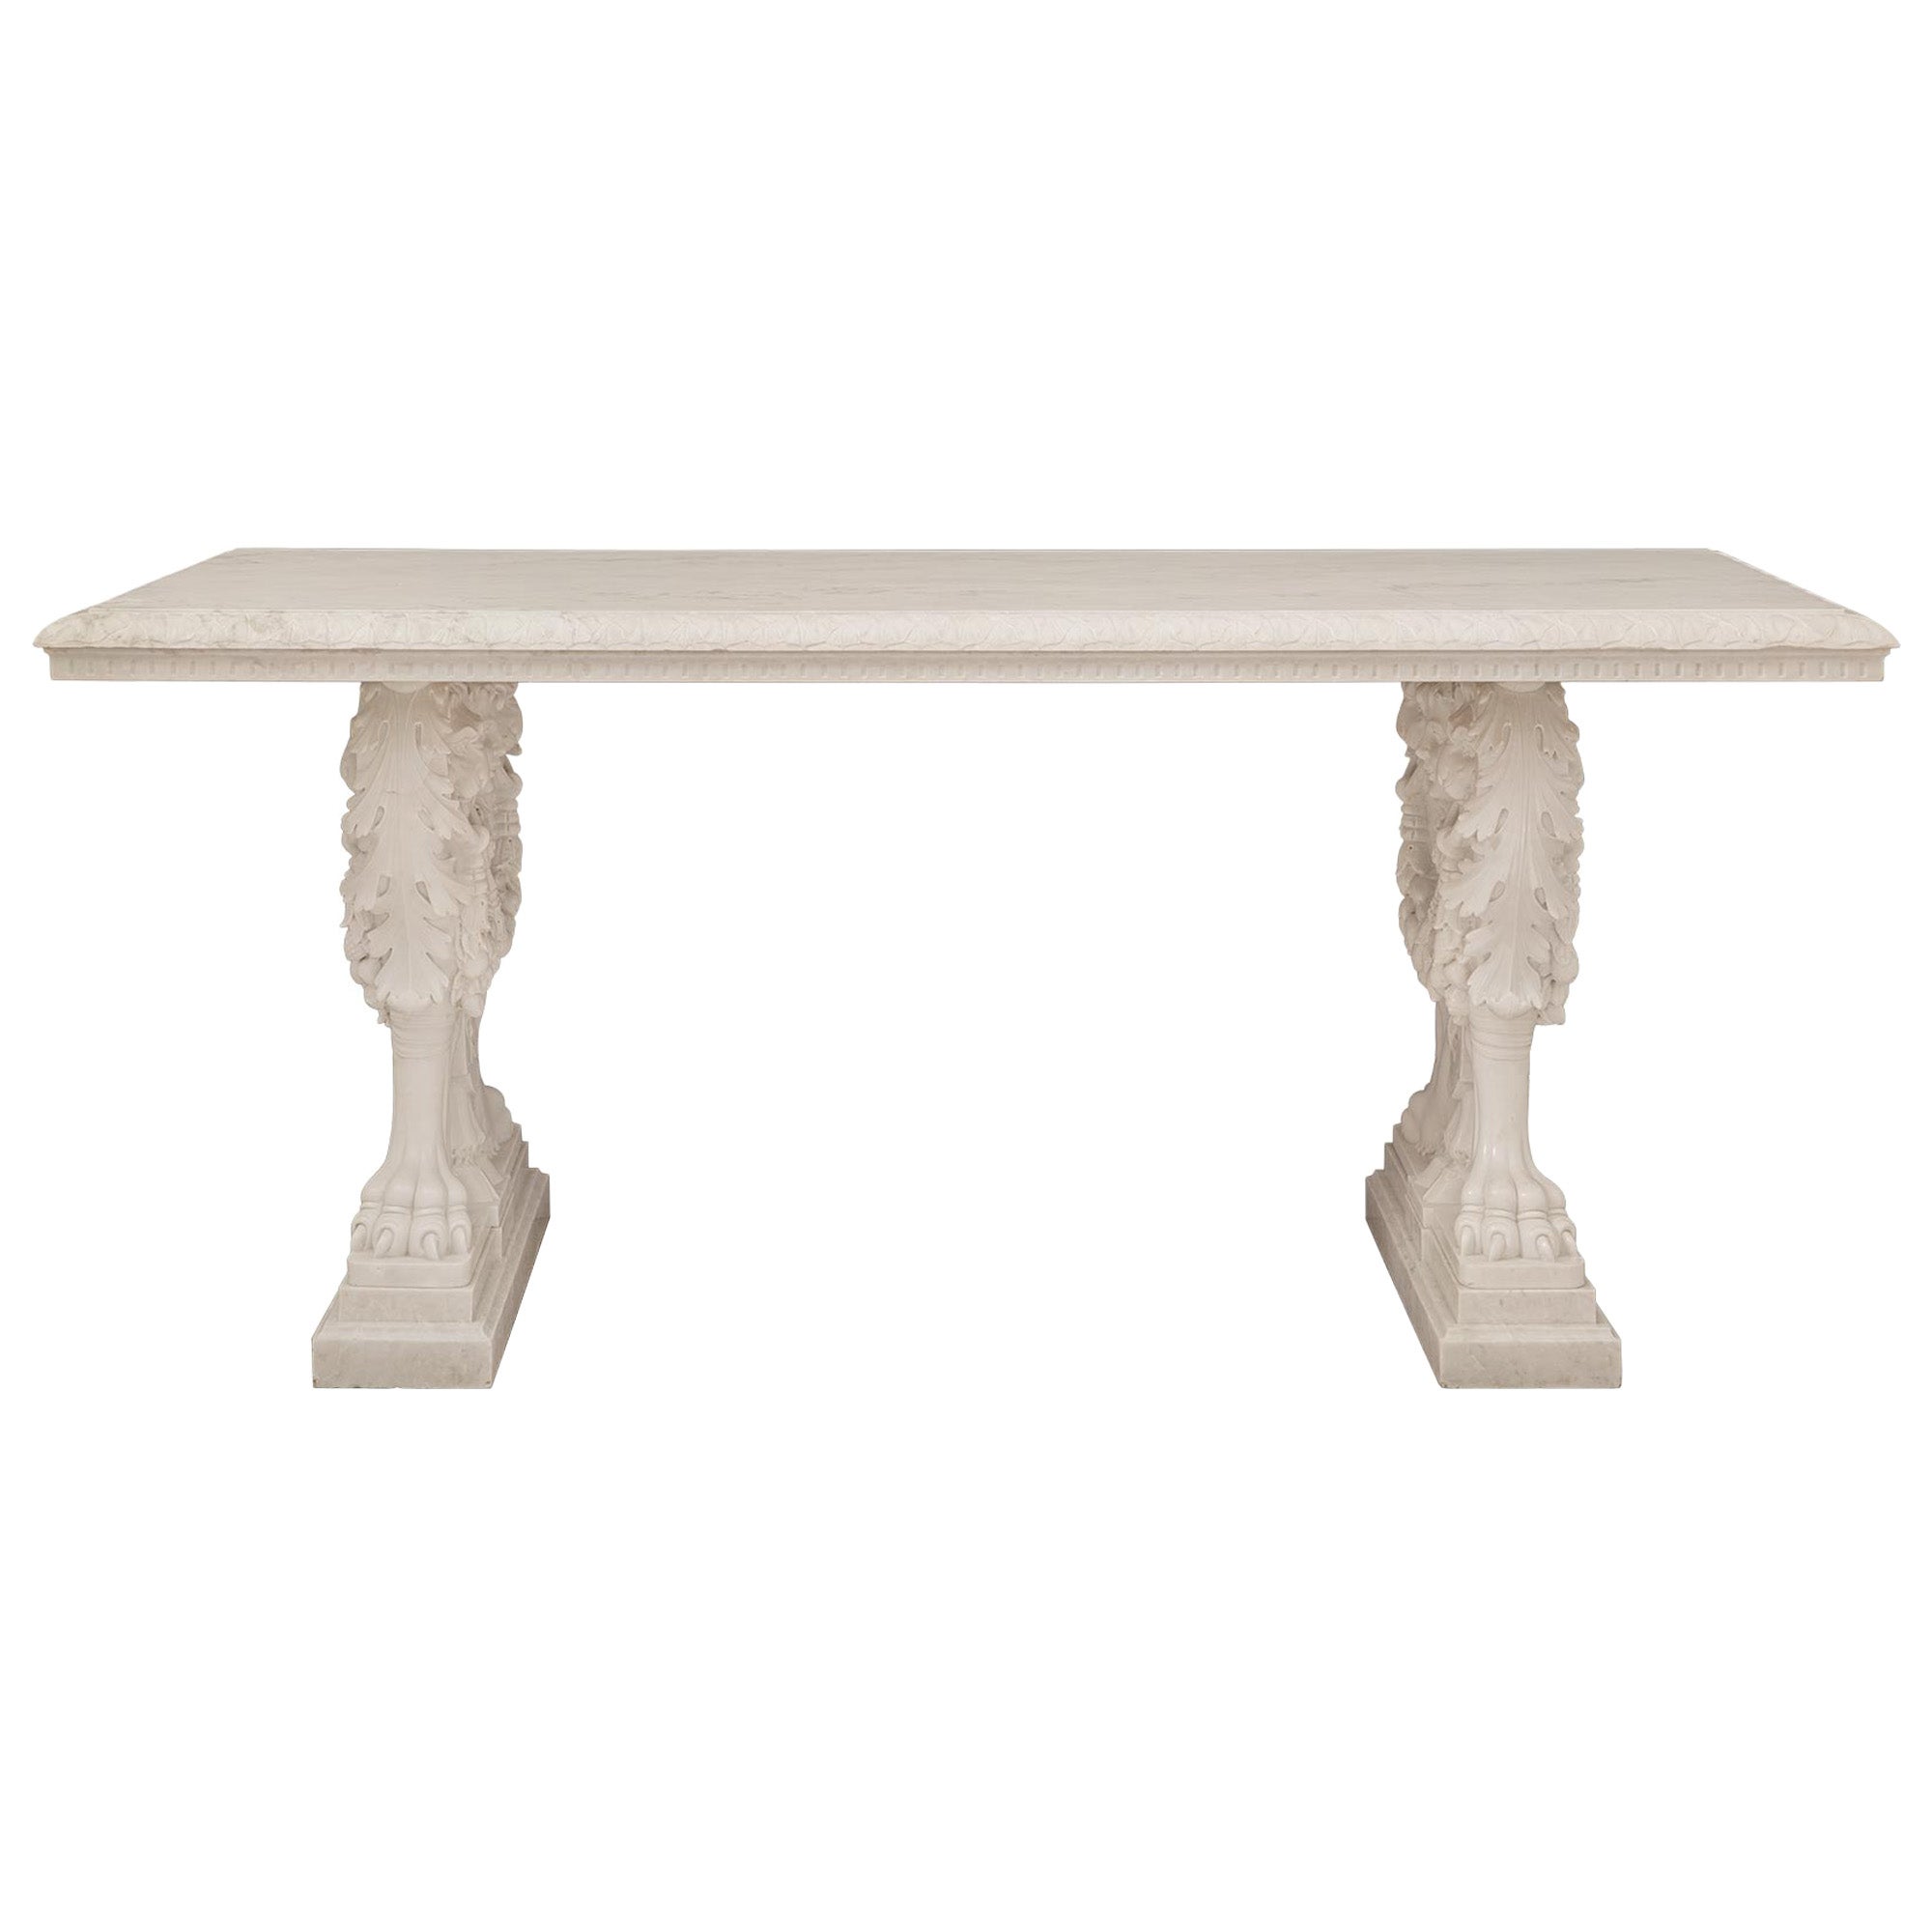 Italian 19th Century Neo-Classical St. White Carrara Marble Center Table For Sale